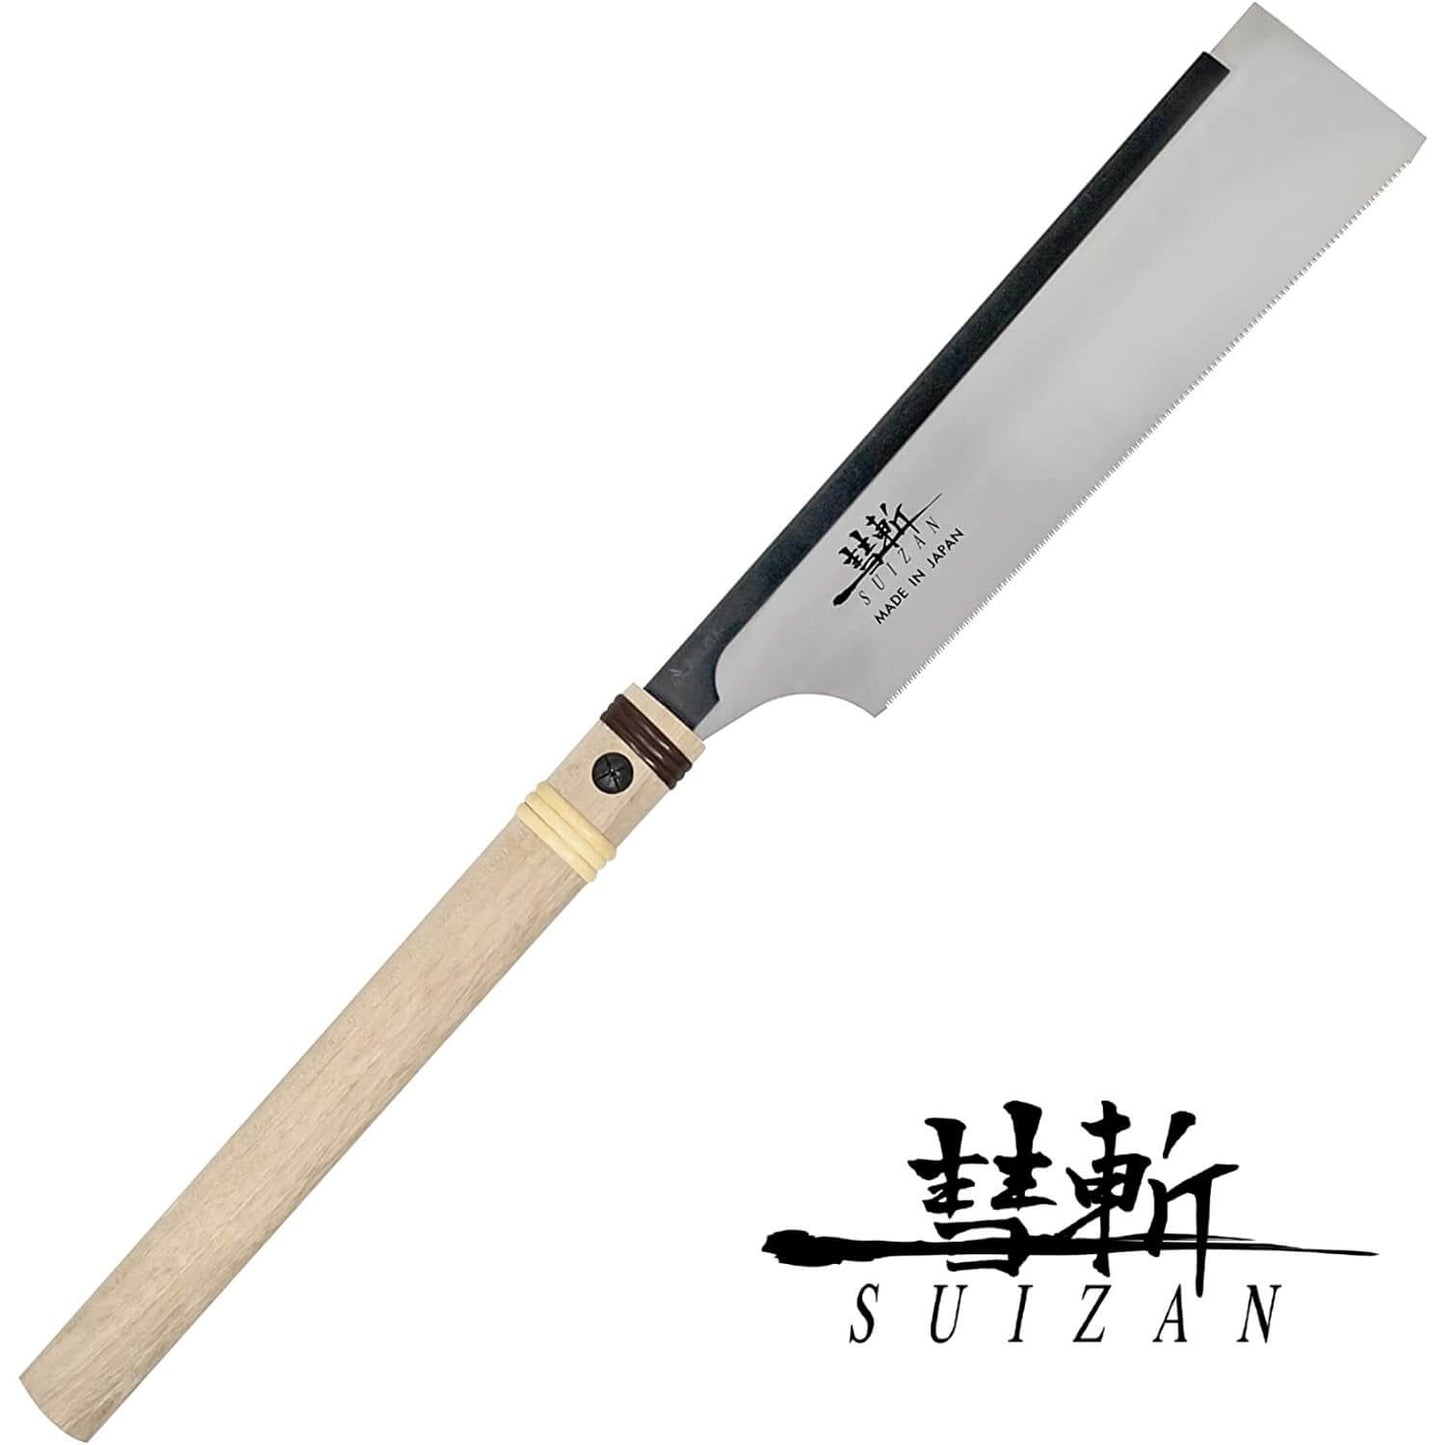 SUIZAN Japanese Hand Saw 9.5 Inch Dozuki Dovetail Pull Saw for Woodworking